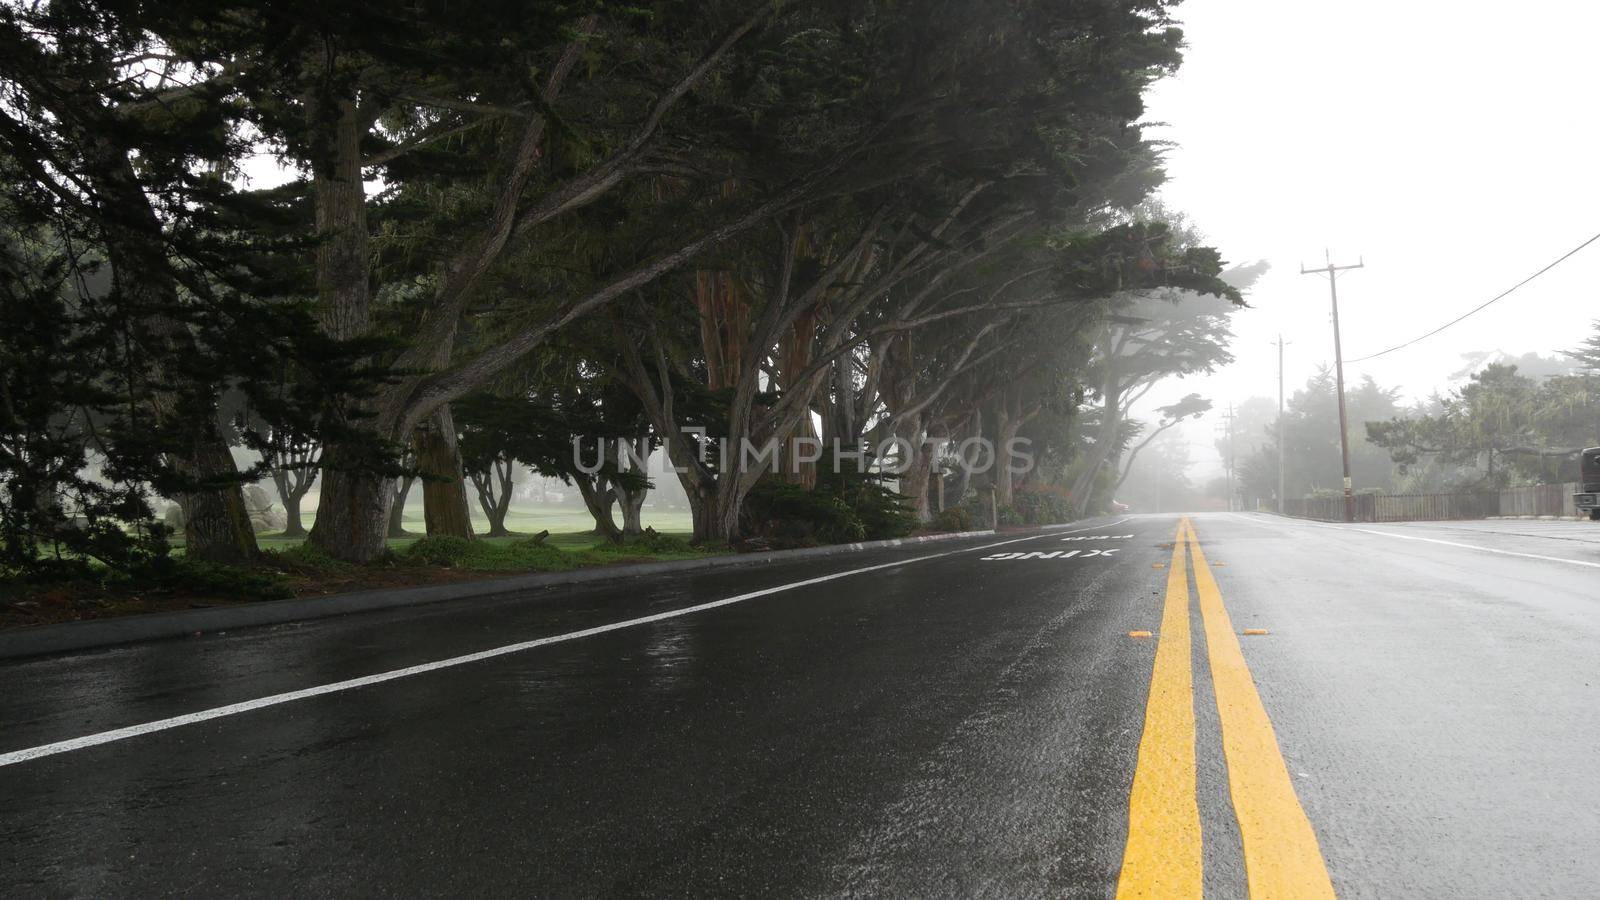 Wet road asphalt in fog, misty mysterious forest. Row of trees in foggy rainy weather, calm haze in Monterey, California USA. Tranquil atmosphere. Moody gloomy road trip, yellow dividing line marking.